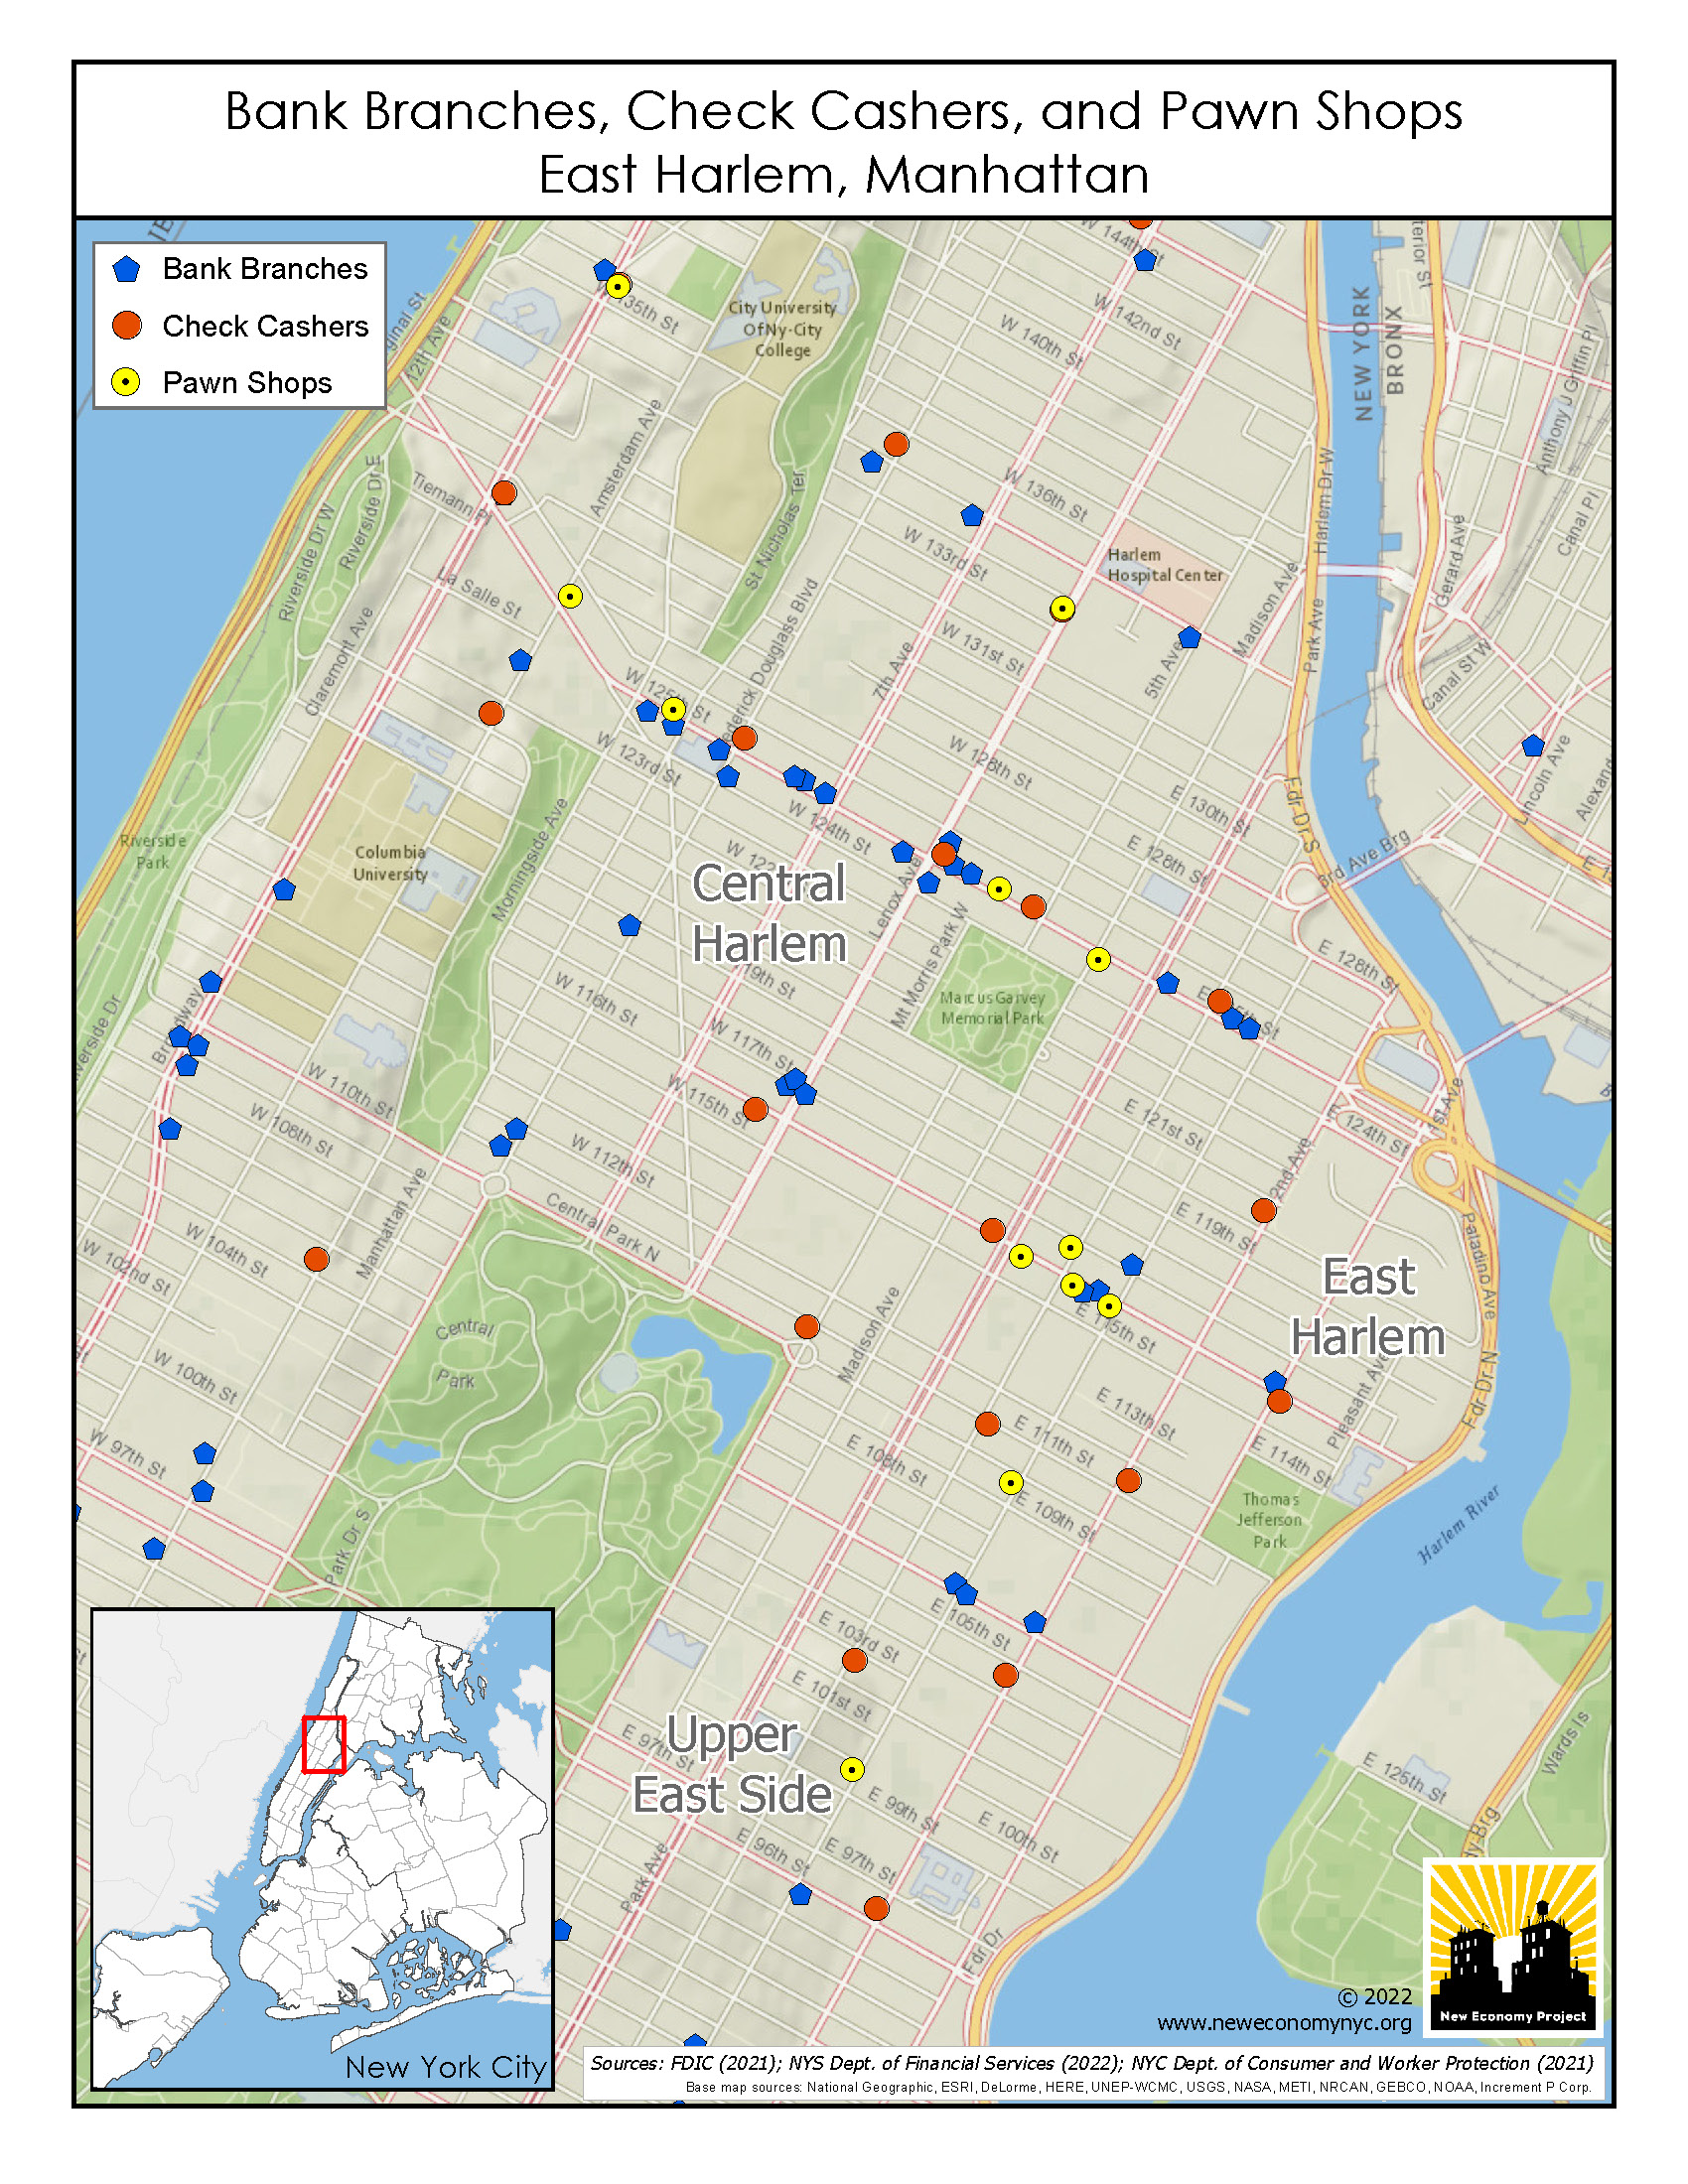 Bank Branches, Check Cashers, and Pawn Shops - East Harlem